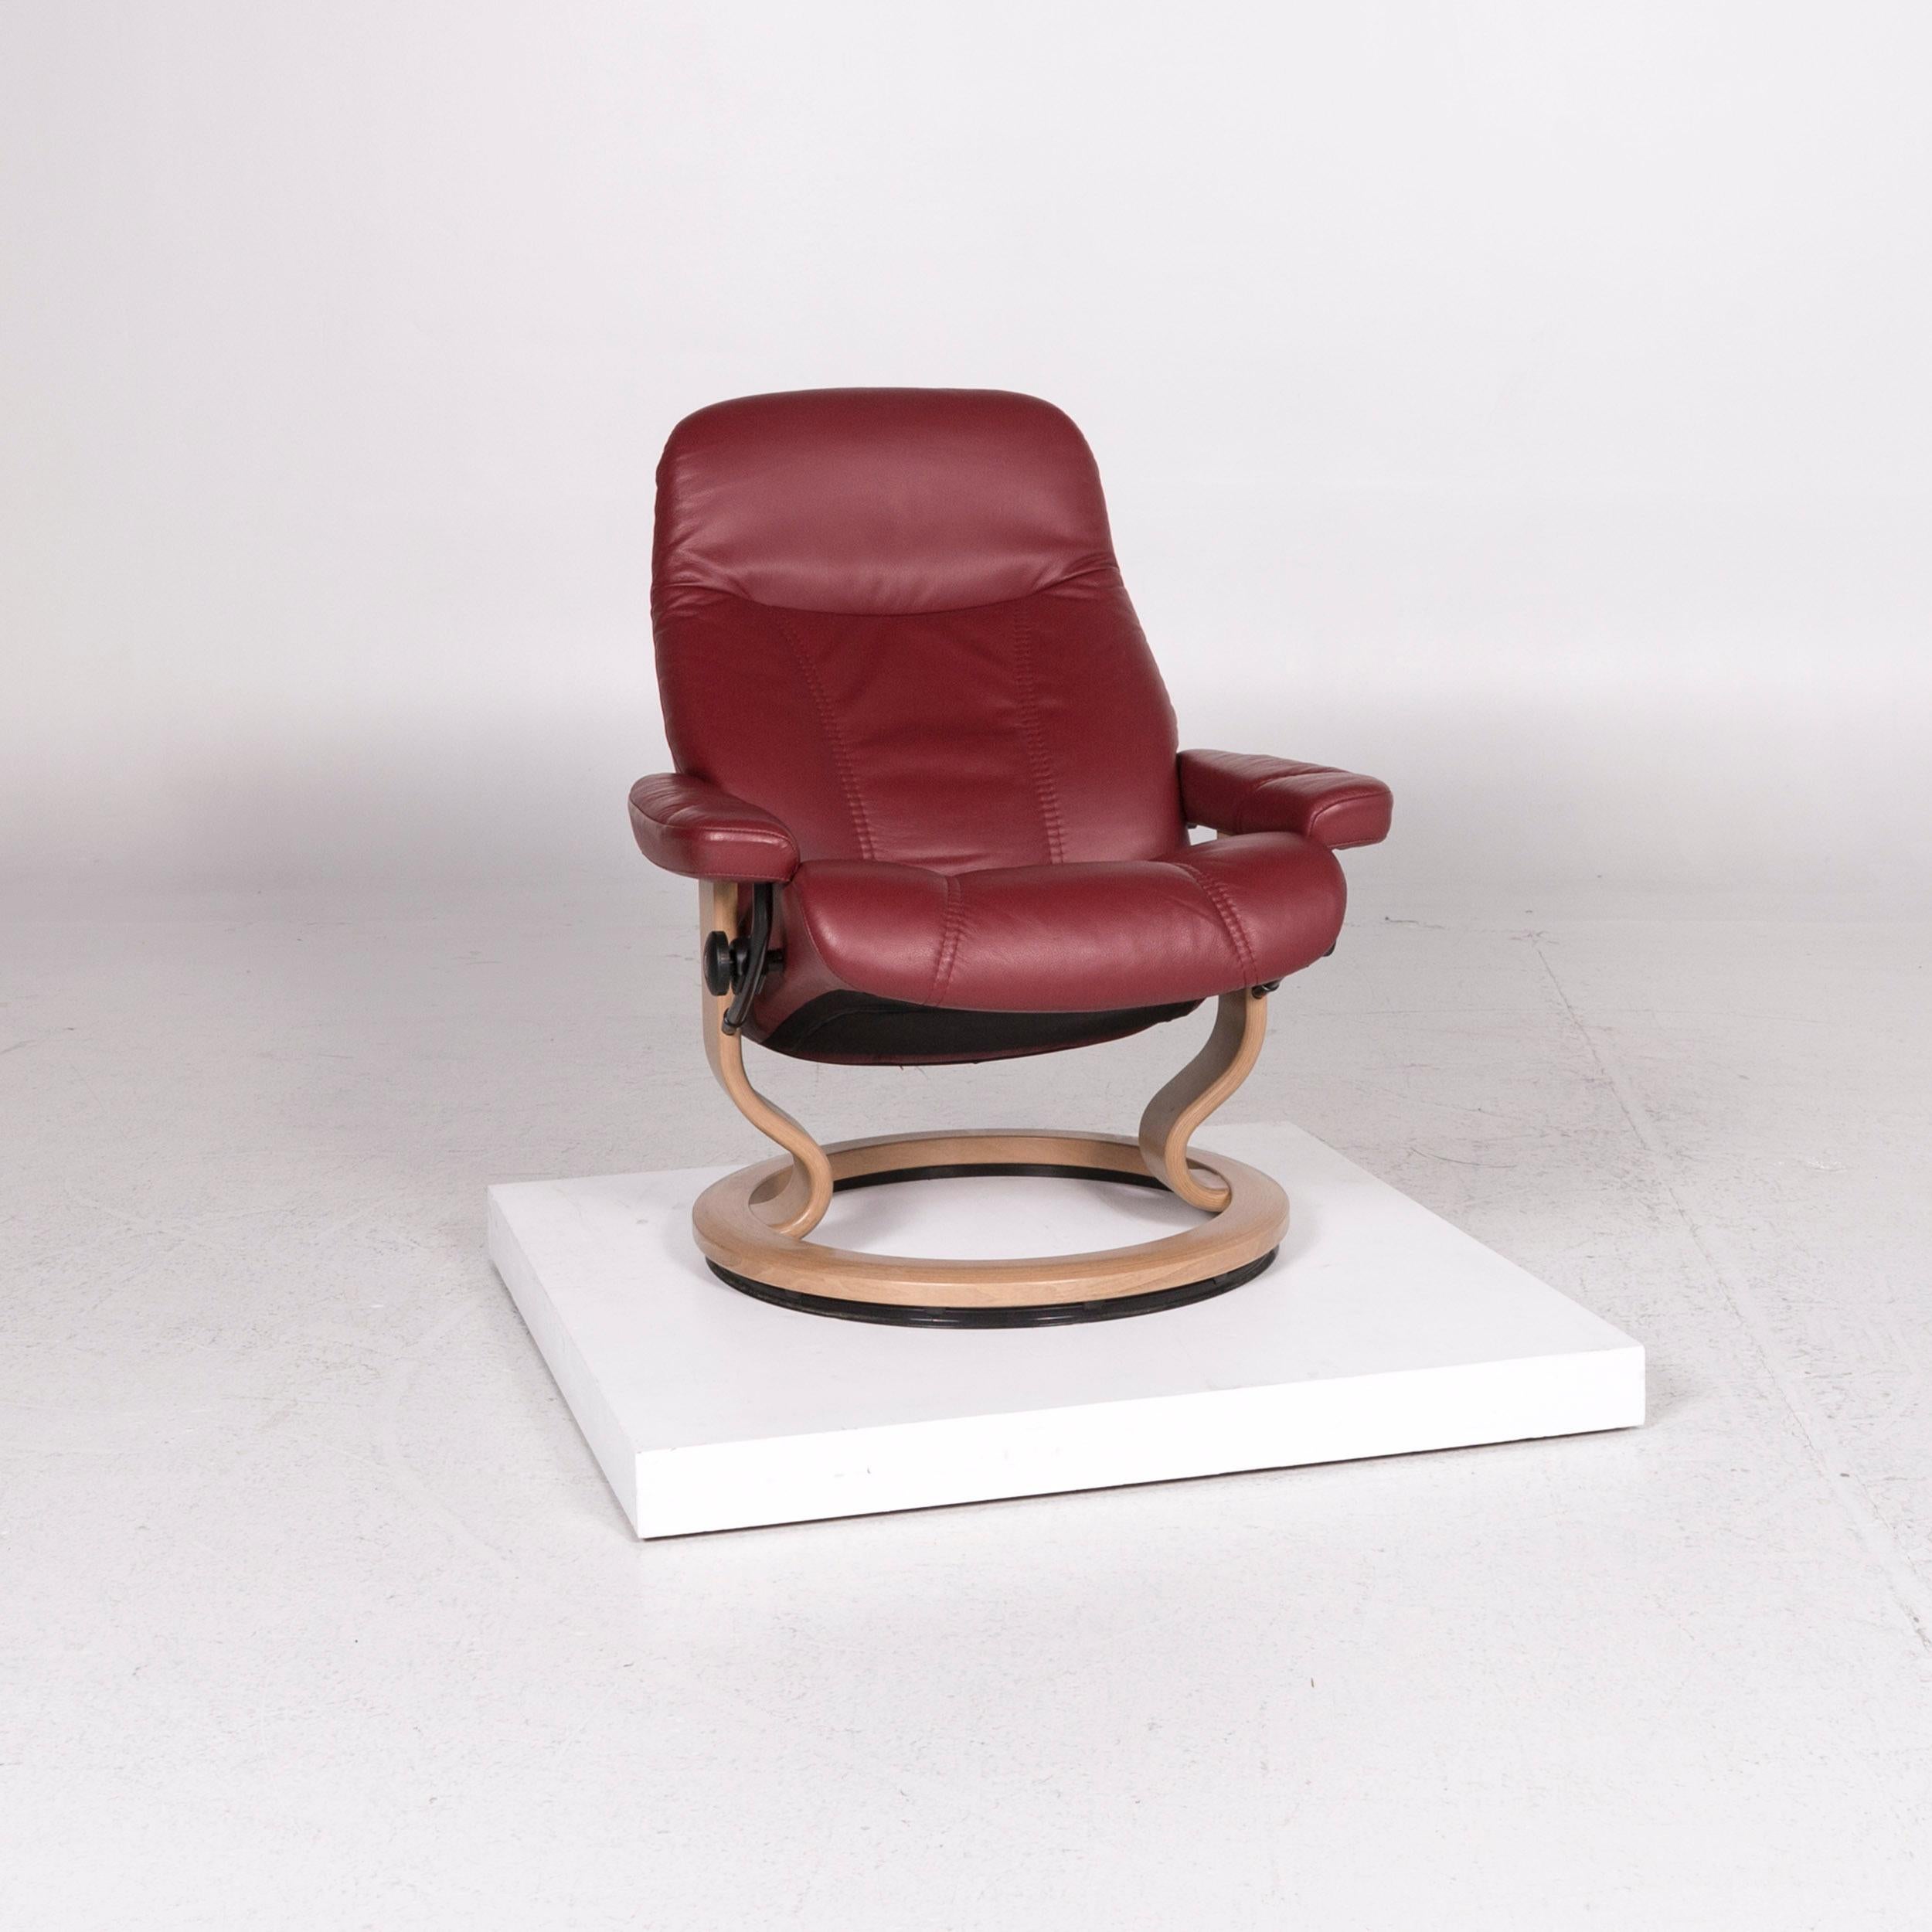 We bring to you a stressless consul leather armchair red relax function function size M.

 

 Product measurements in centimeters:
 

Depth 70
Width 75
Height 100
Seat-height 40
Rest-height 52
Seat-depth 45
Seat-width 55
Back-height 65.